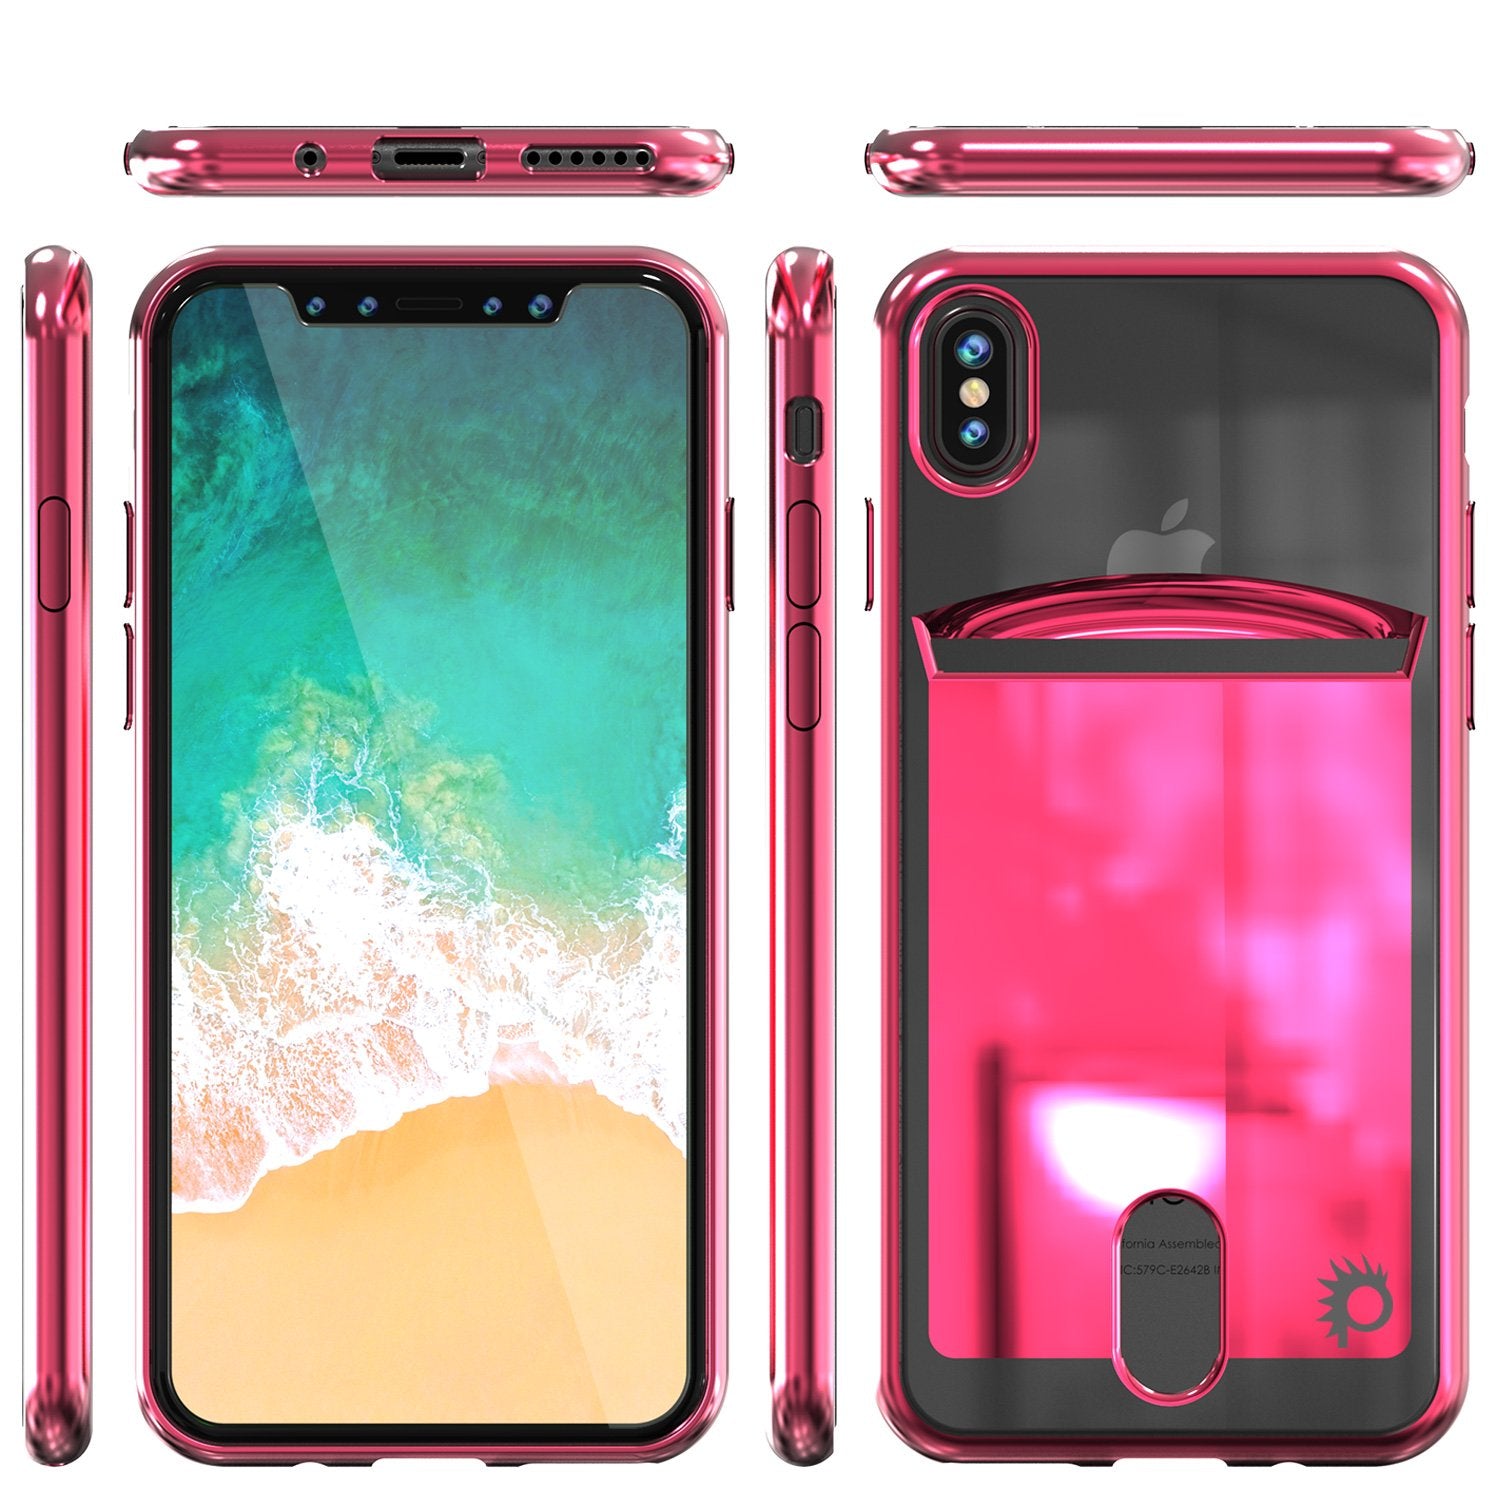 iPhone 8 Case, PUNKcase [LUCID Series] Slim Fit Protective Dual Layer Armor Cover W/ Scratch Resistant Screen Protector [Rose Pink]